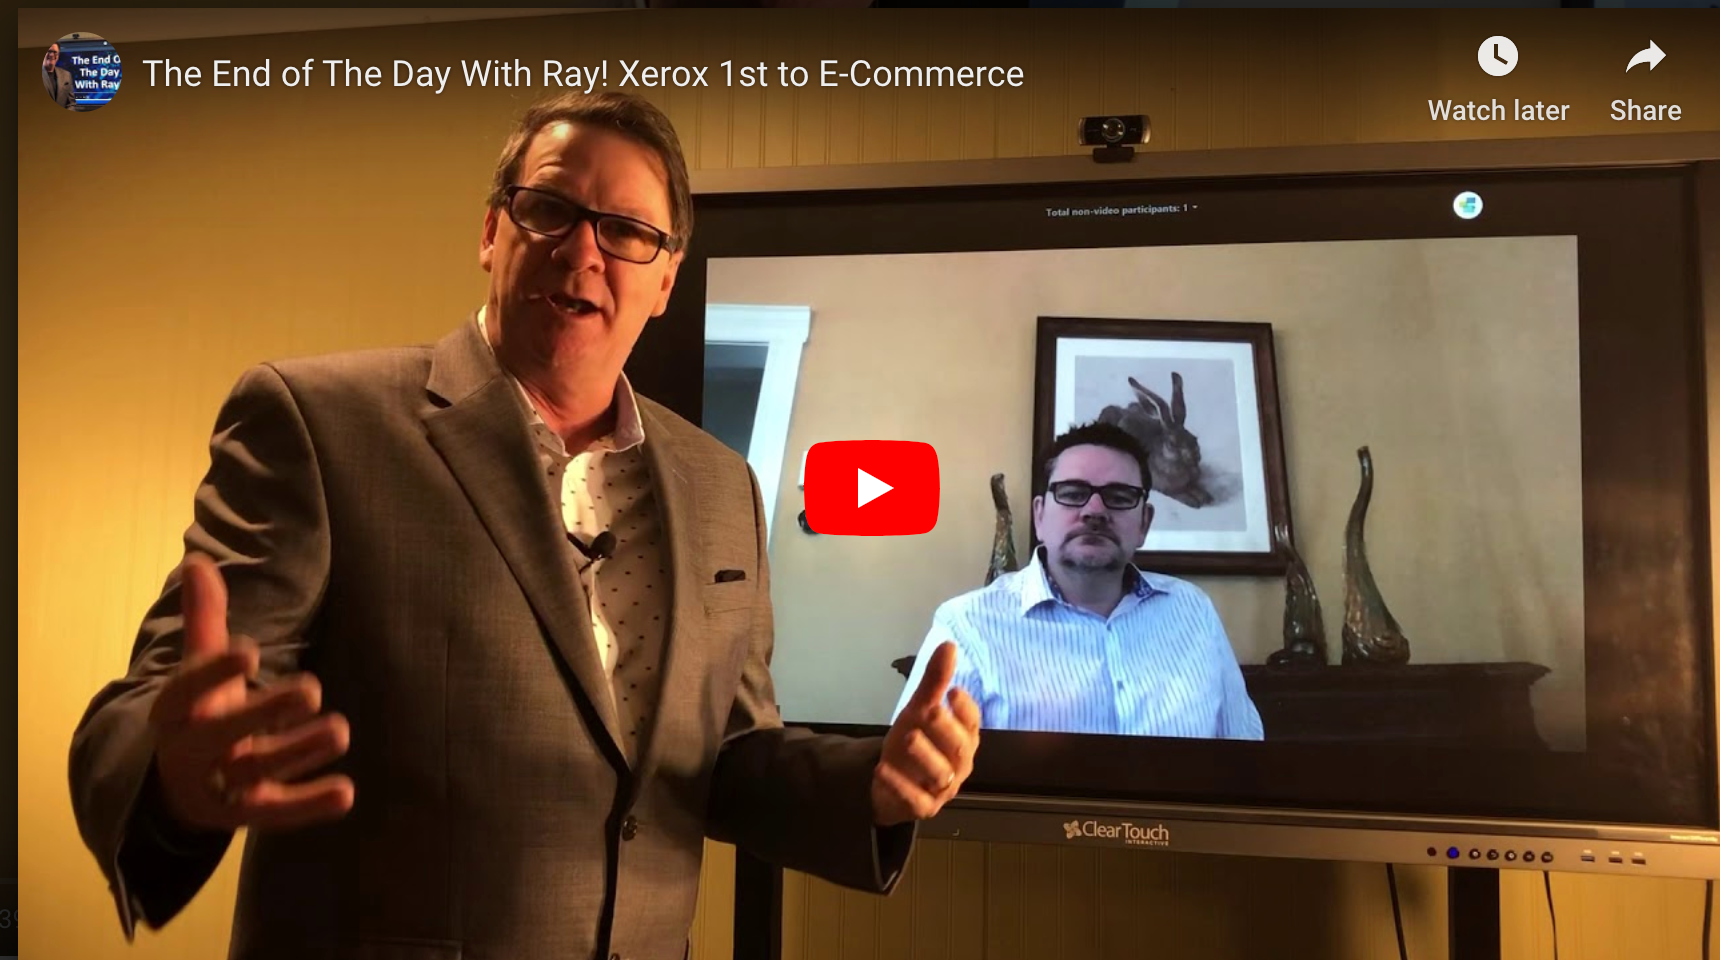 The End of The Day With Ray! Xerox 1st to E-Commerce